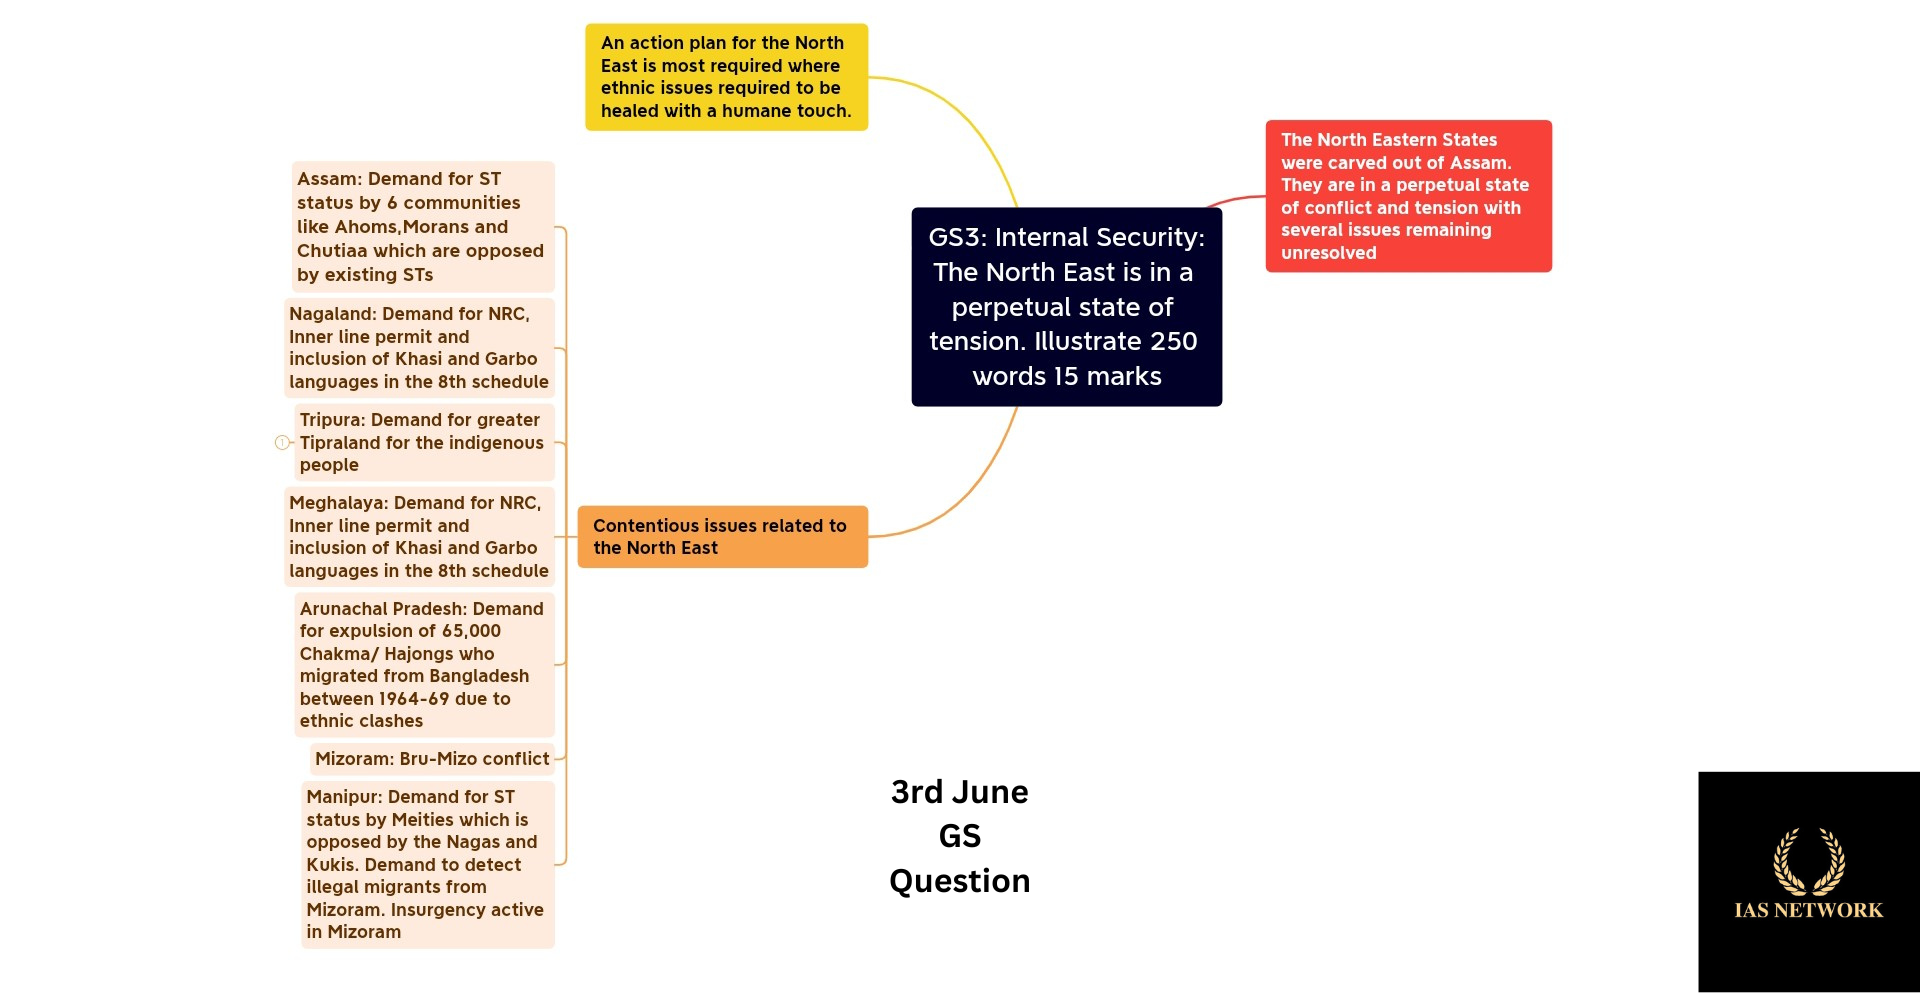 IAS NETWORK 3rd JUNE GS QUESTION